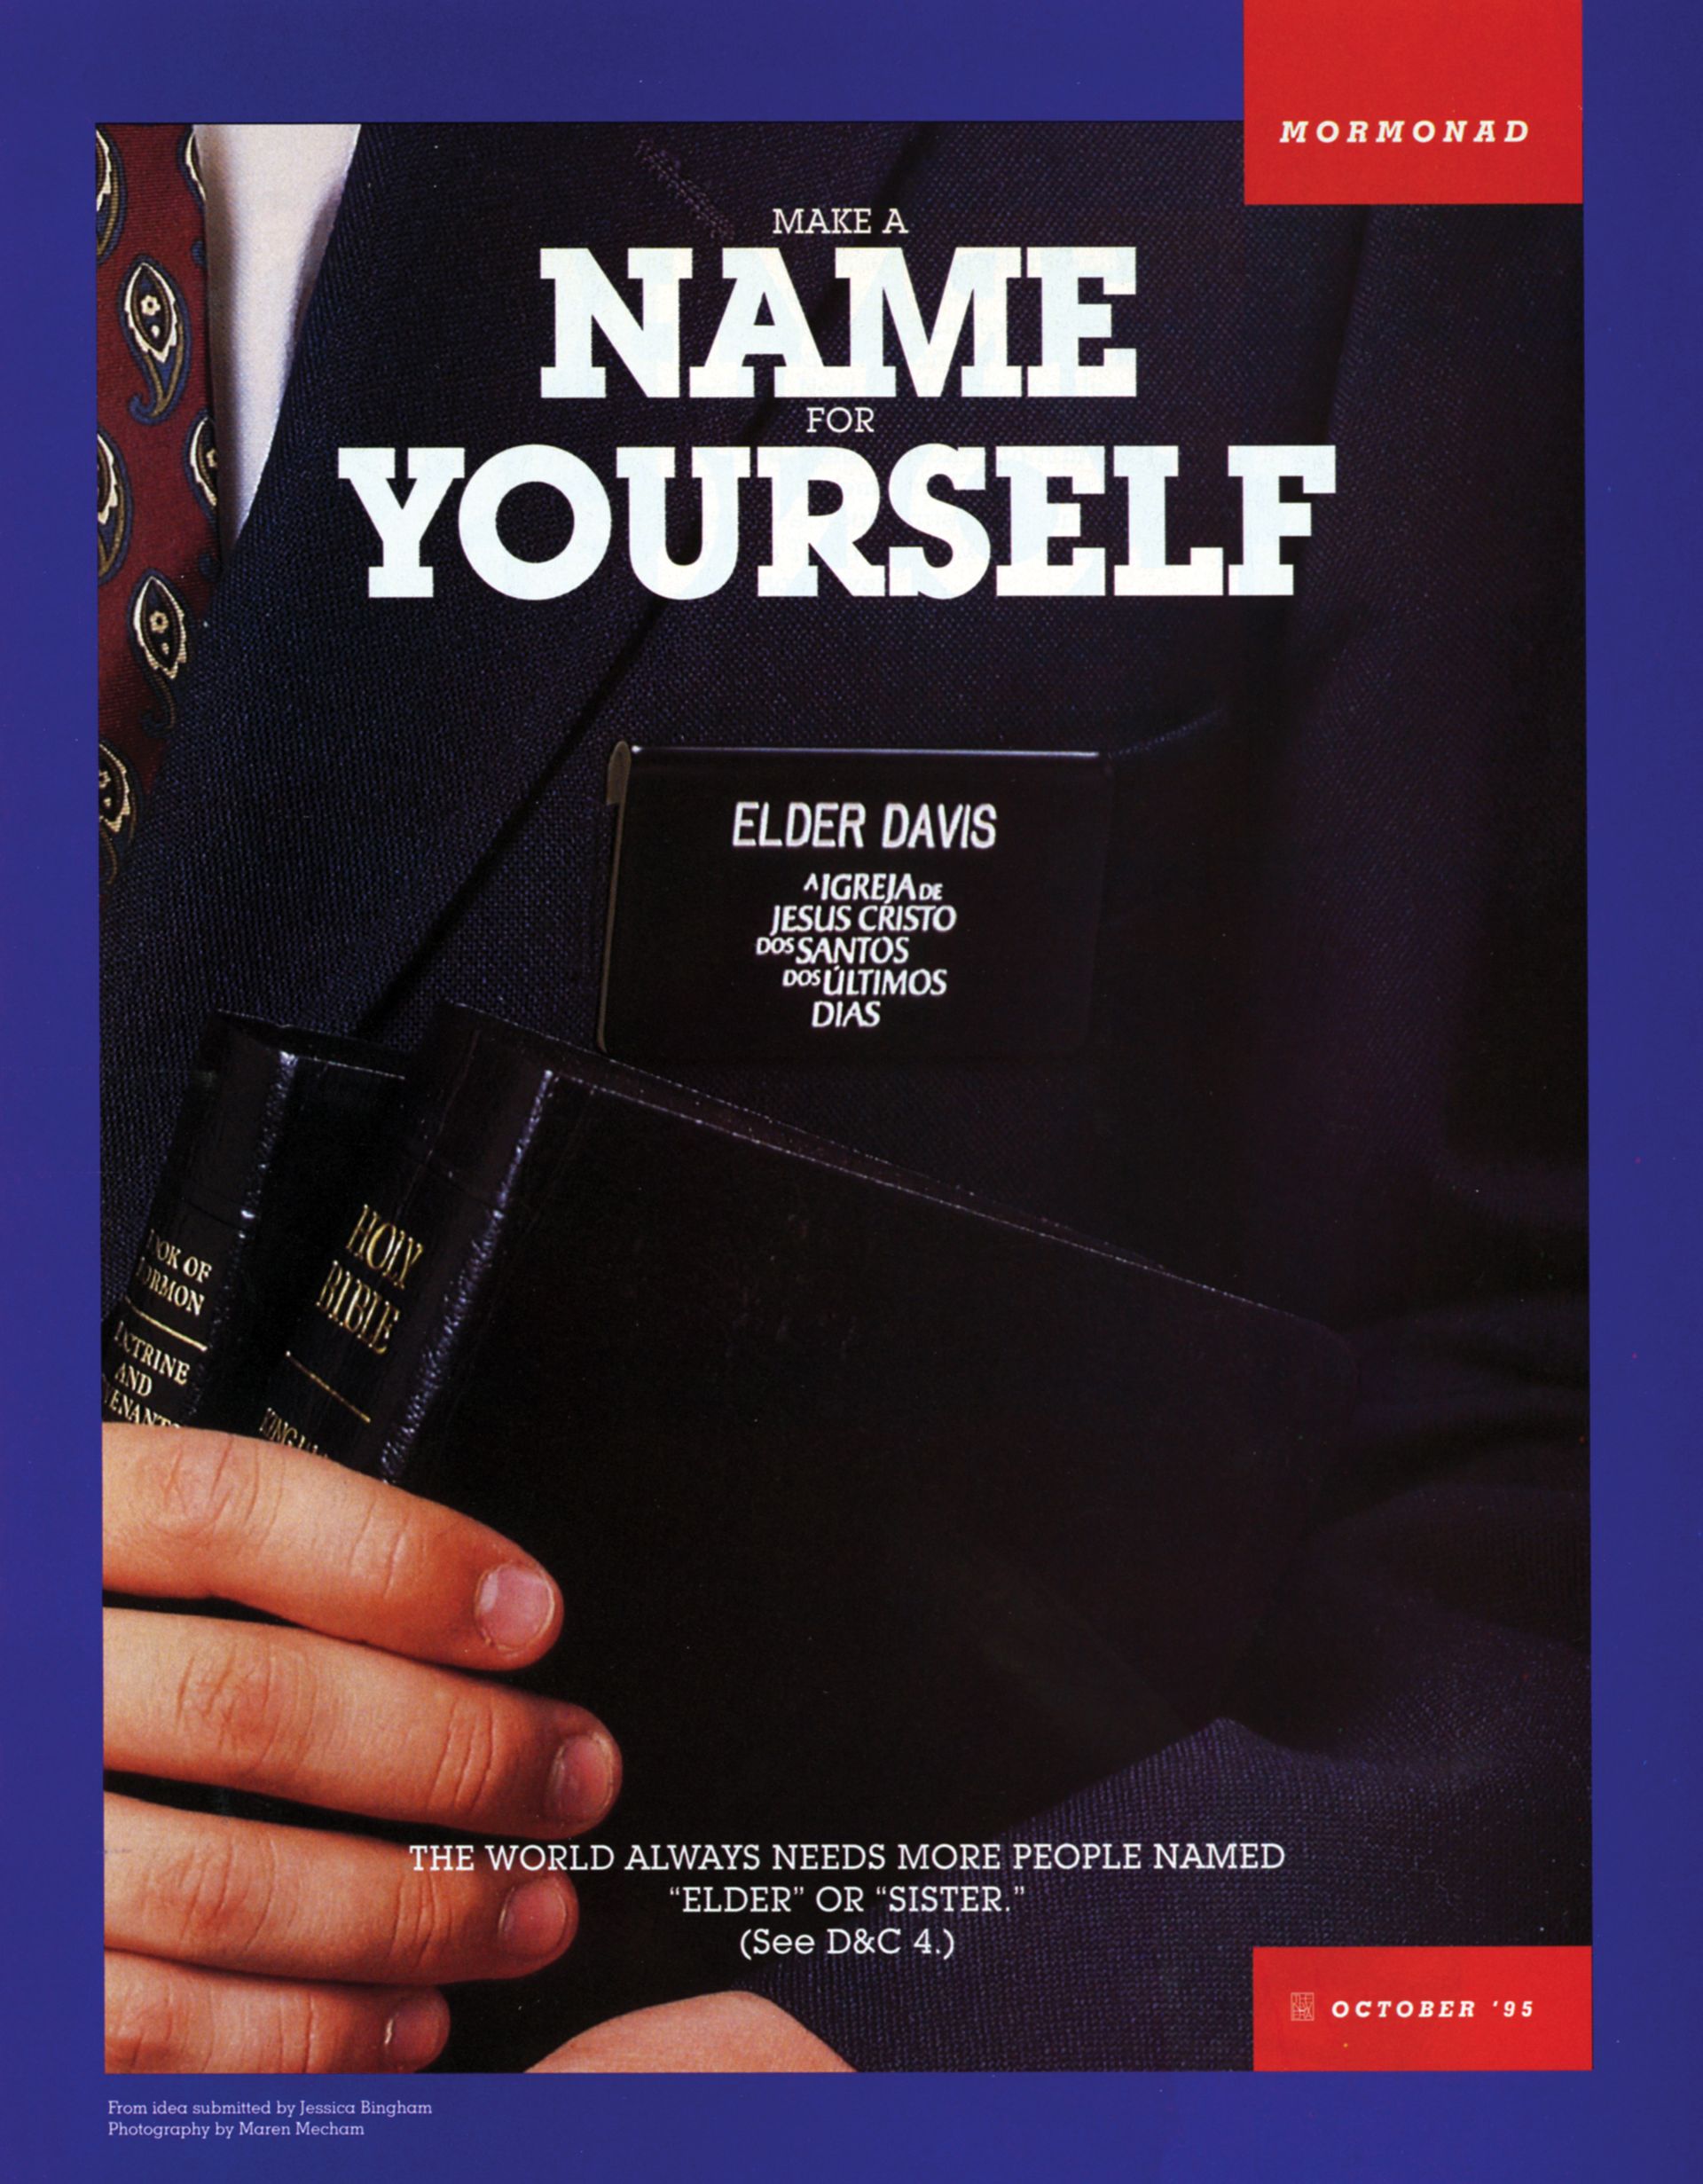 Make a Name for Yourself. The world always needs more people named “Elder” or “Sister.” (See D&C 4.) Oct. 1995 © undefined ipCode 1.